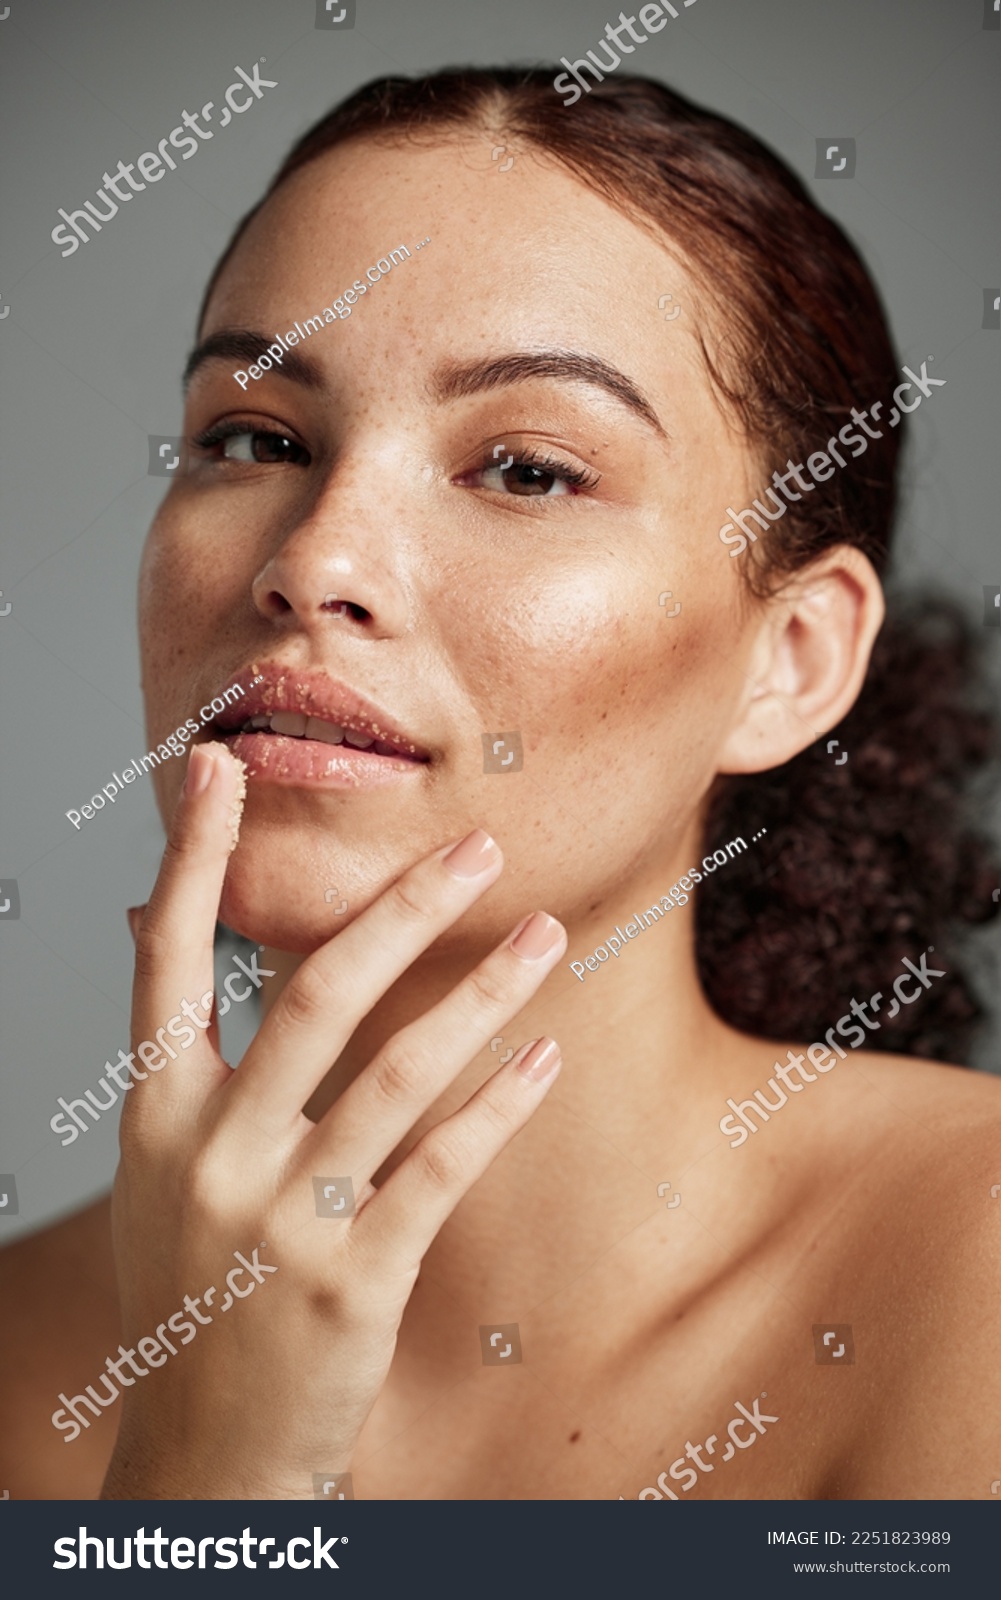 Face, sugar scrub and lips of woman in studio isolated on a gray background. Portrait, cosmetics and skincare of female model with lip dermatology product for exfoliation, cleaning and healthy skin. #2251823989